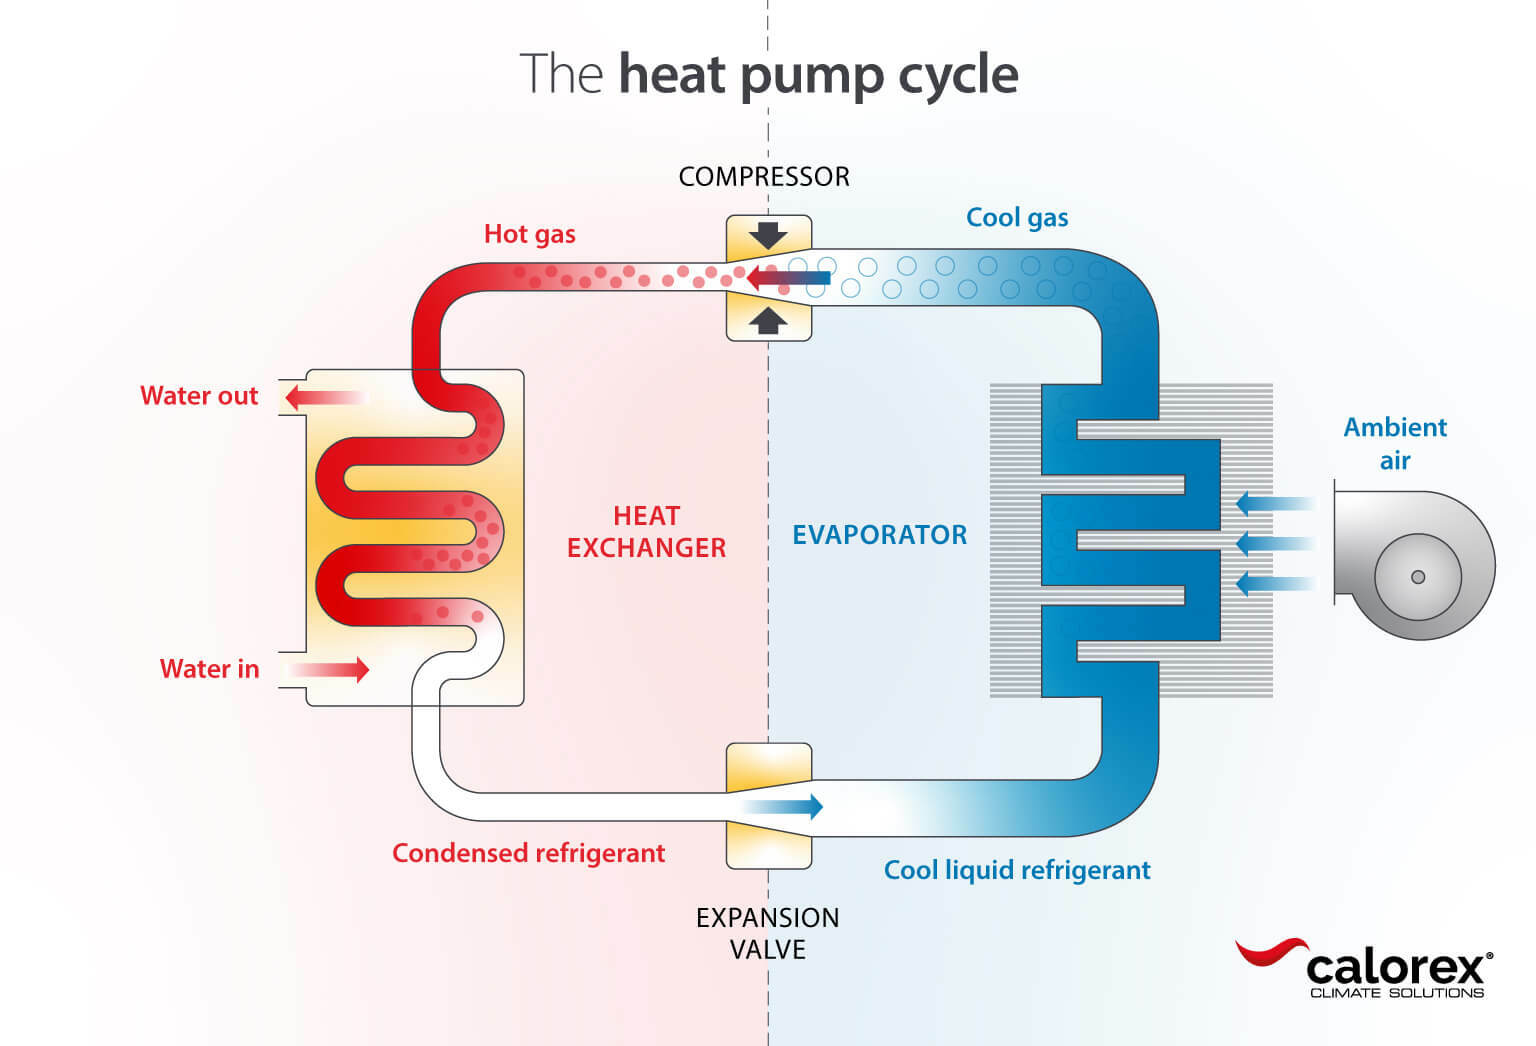 How a swimming pool heat pump works: The heat pump cycle - Calorex infographic